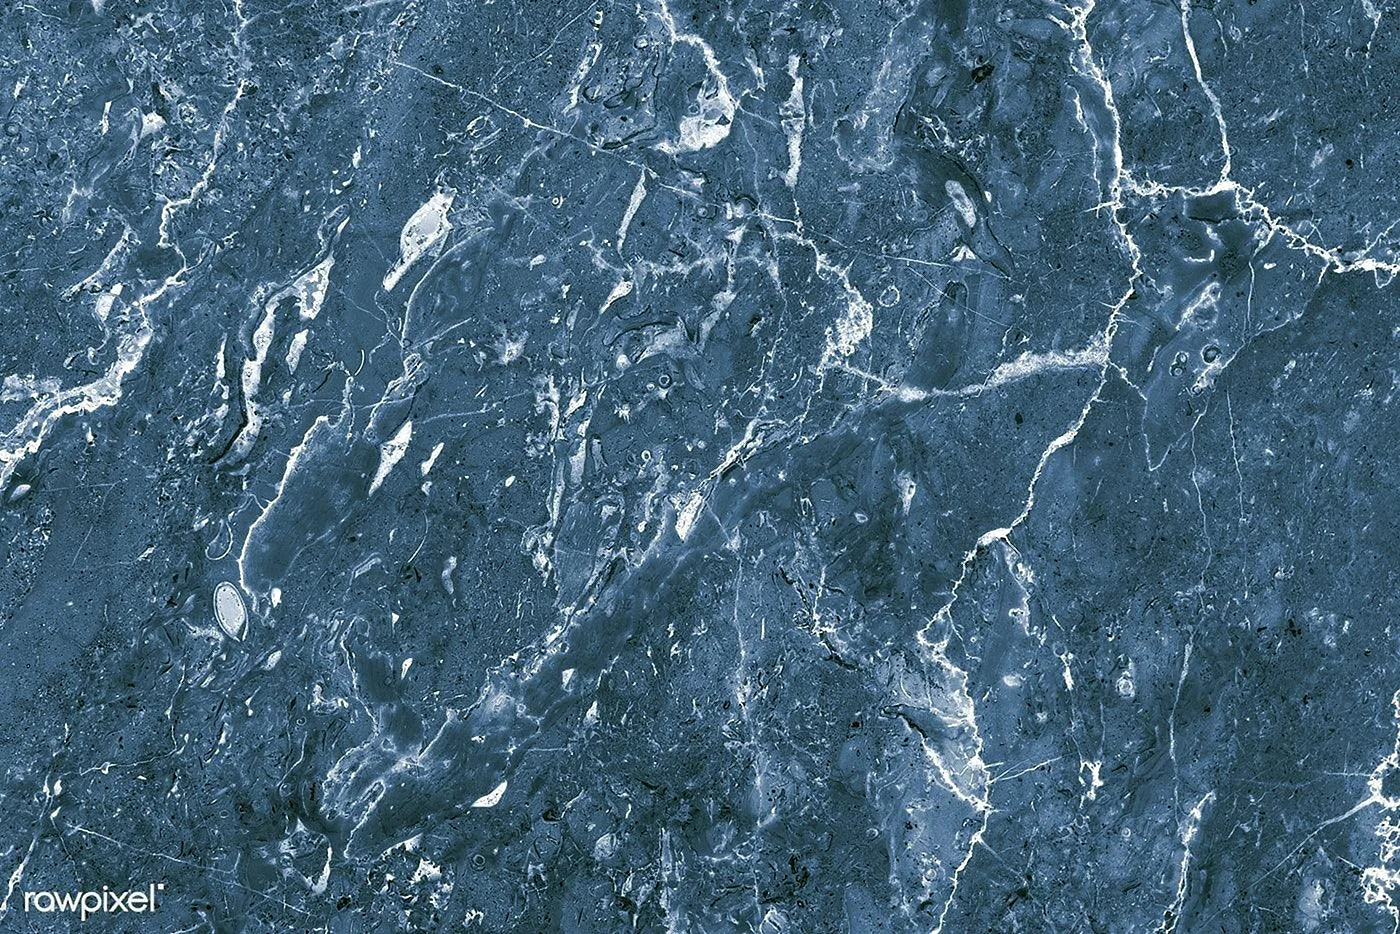 Marble Texture Wallpaper